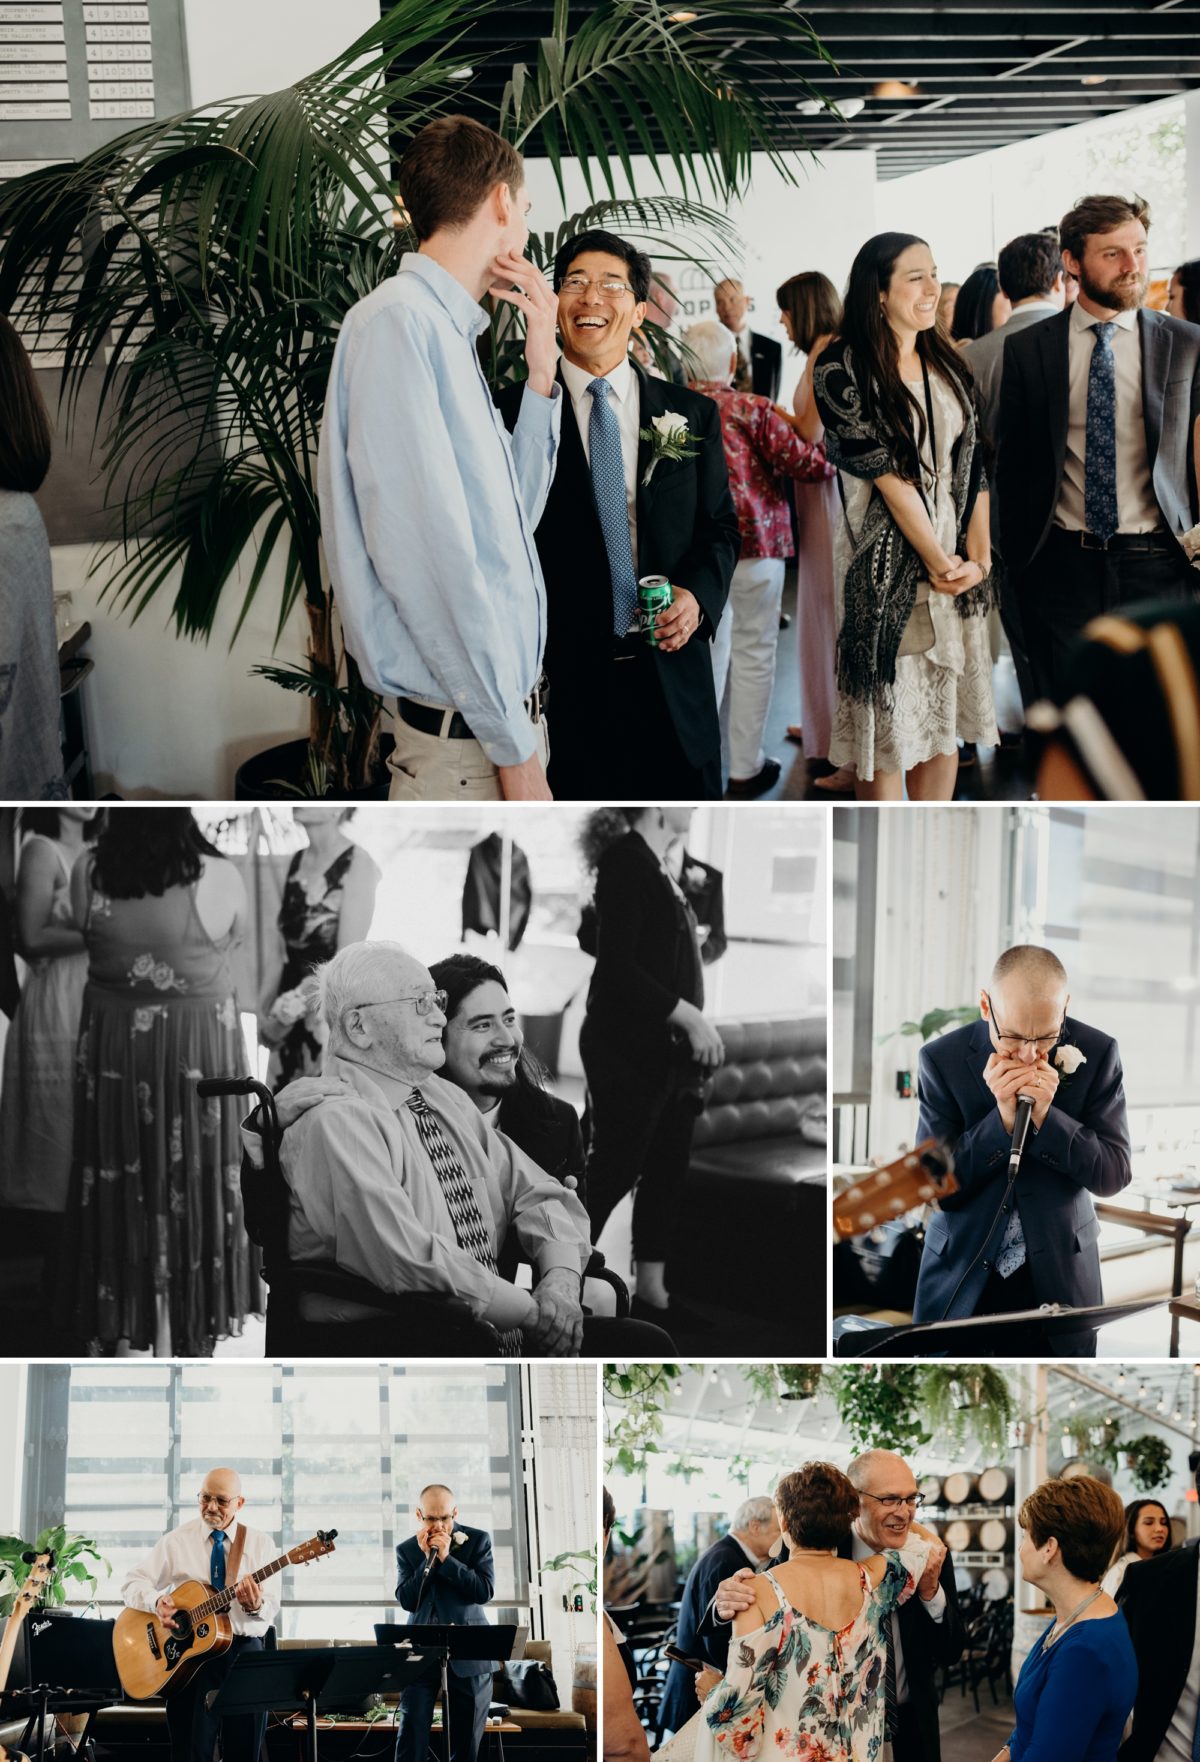 Candid wedding photography at Coopers Hall in Portland, OR by Briana Morrison Photography